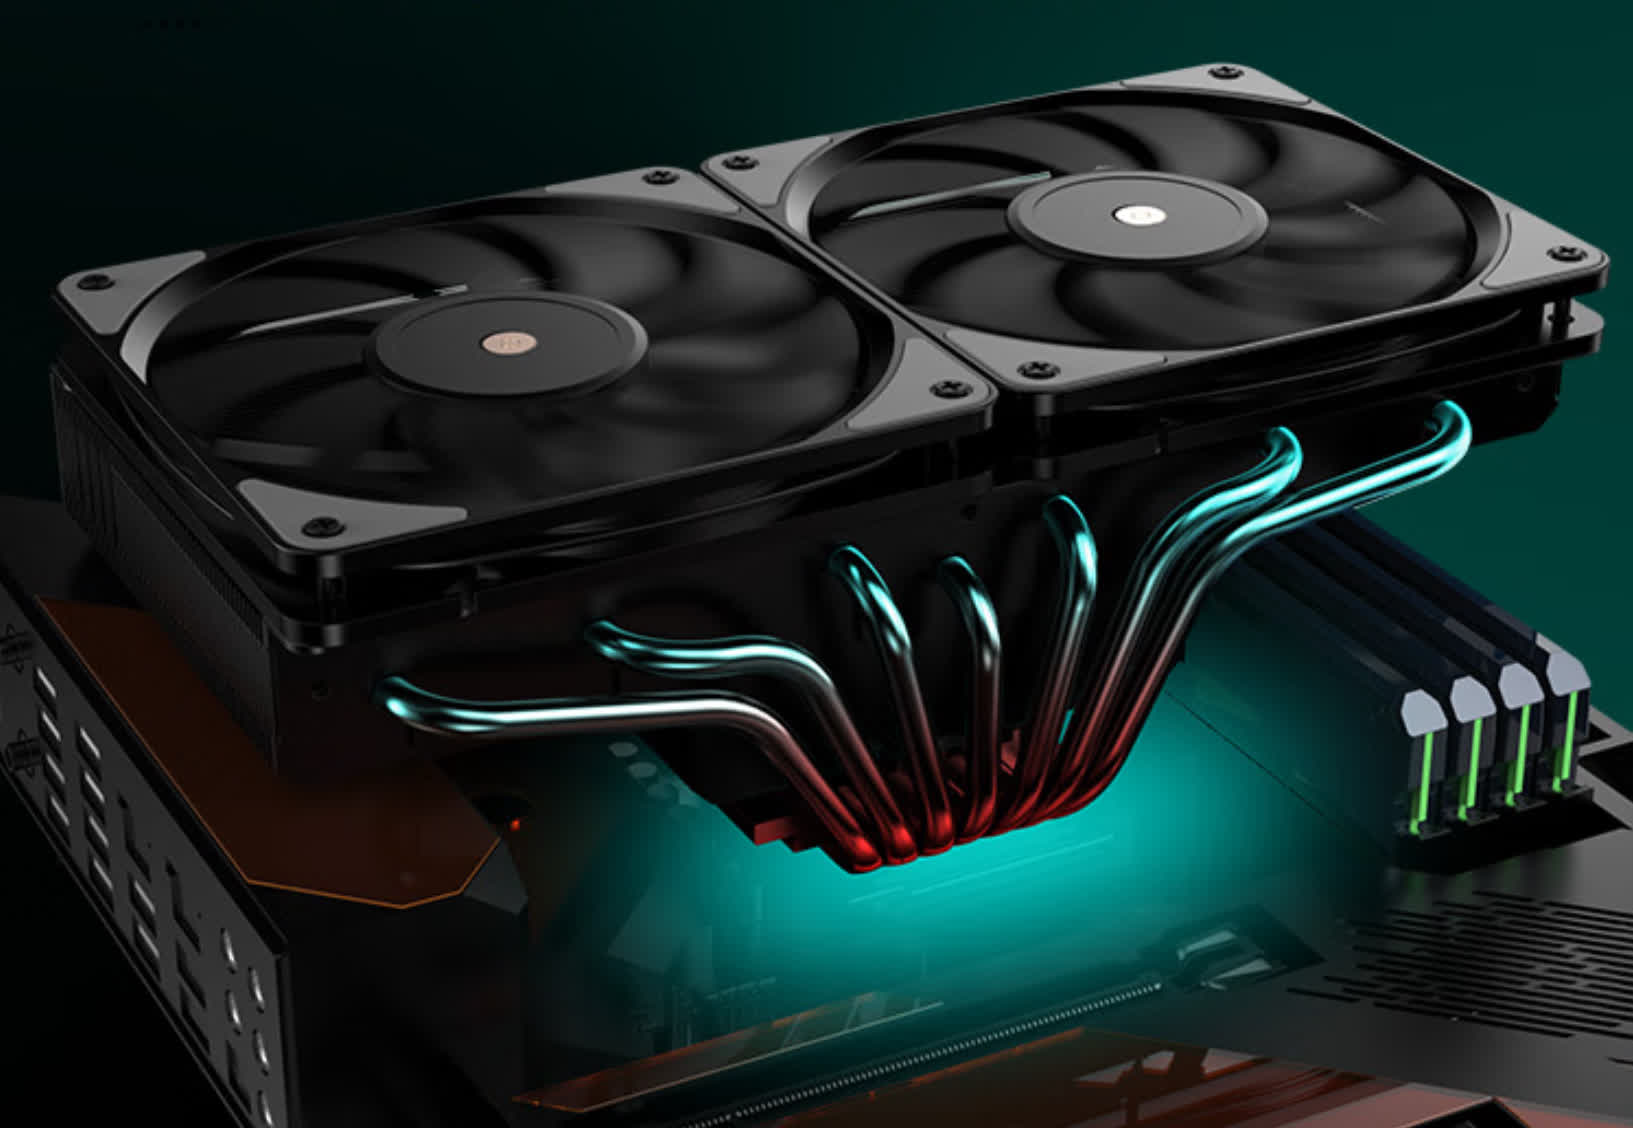 Top-down, dual-fan CPU cooler makes big claims for under $40